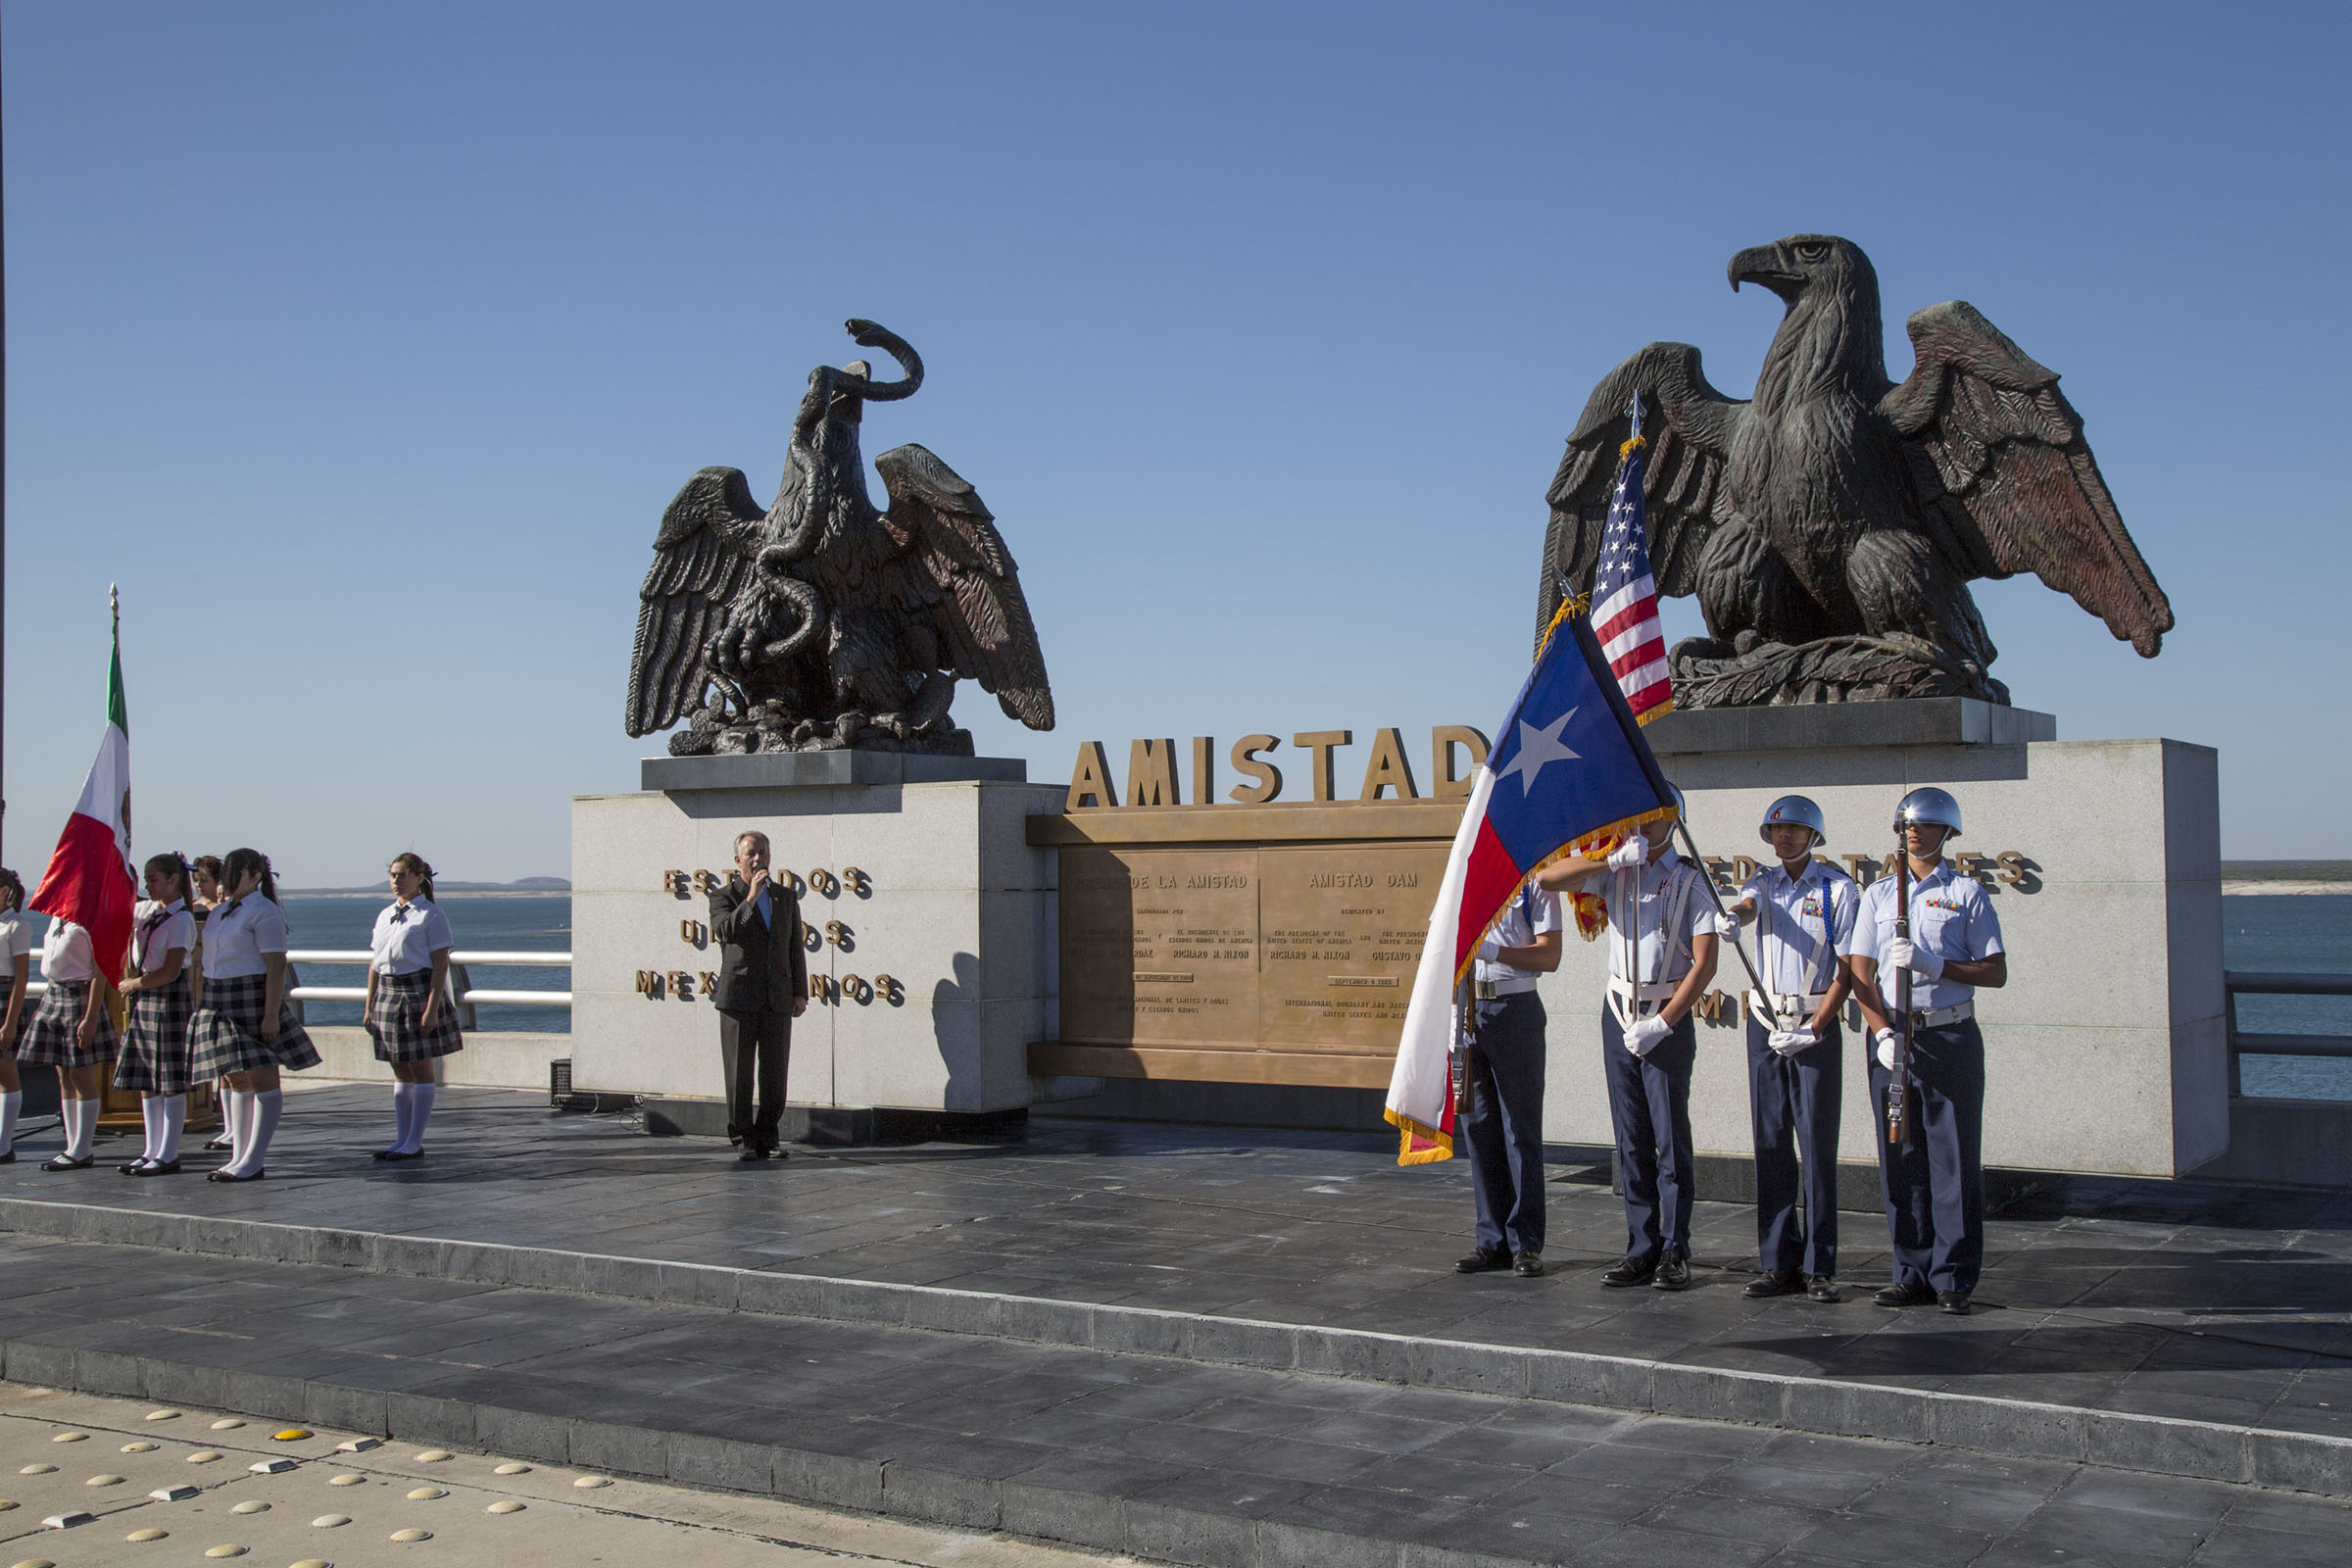 Two large eagle statues on concrete bases, with an "Amistad" sign between